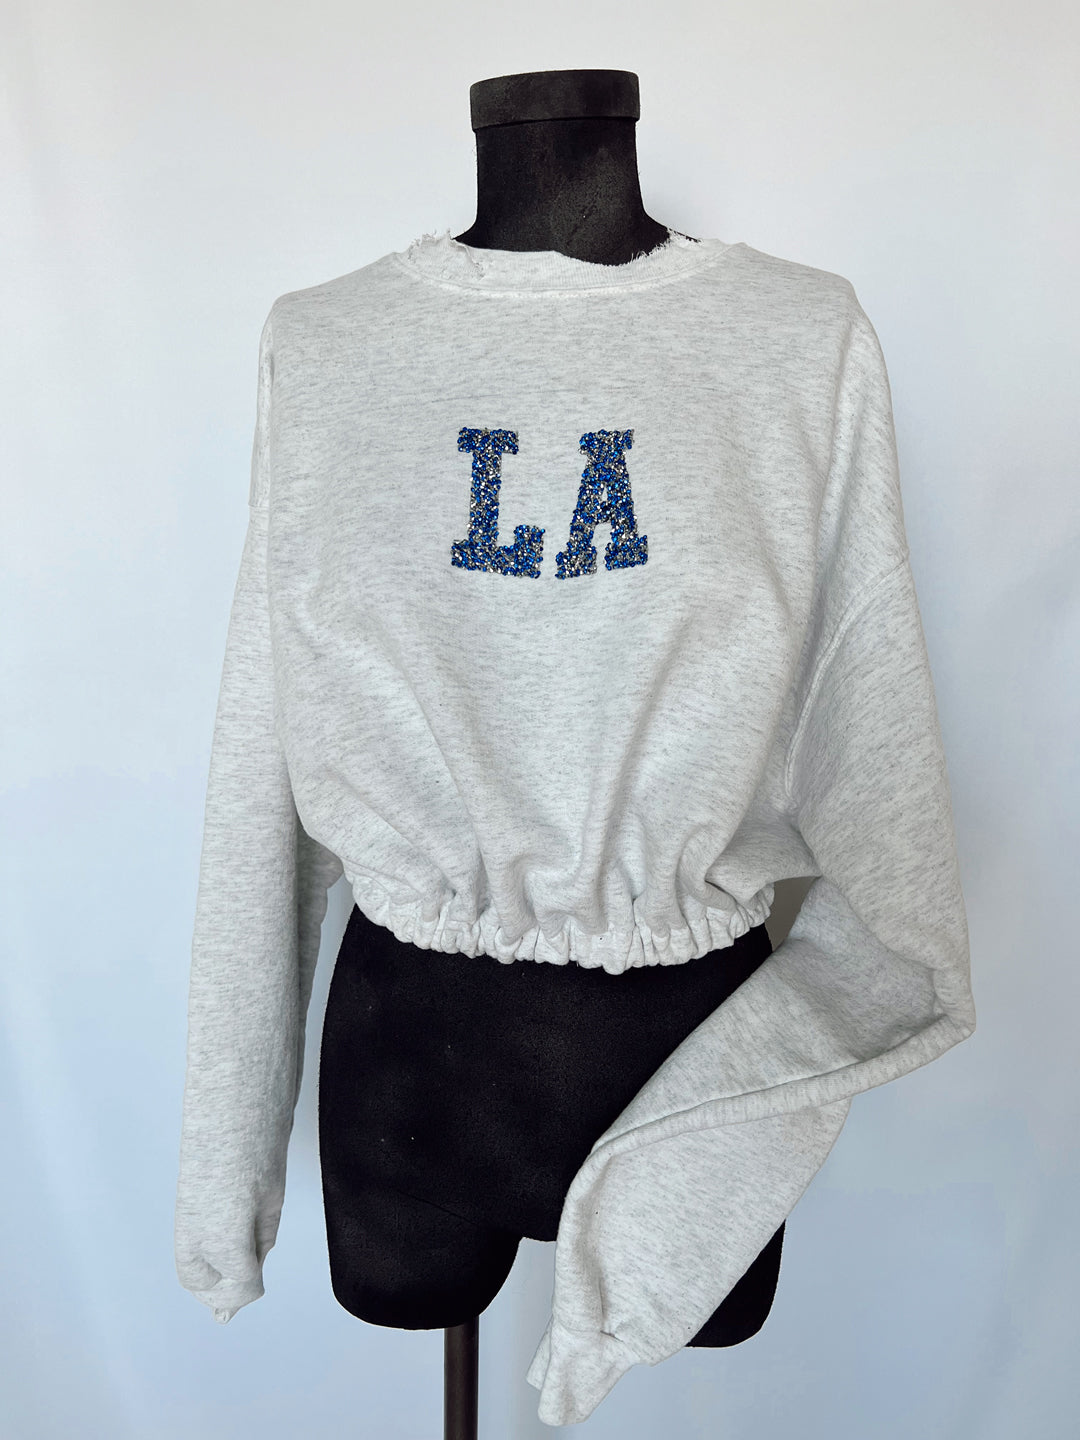 CUSTOMIZABLE Sparkled Letter Sweatshirt Cropped